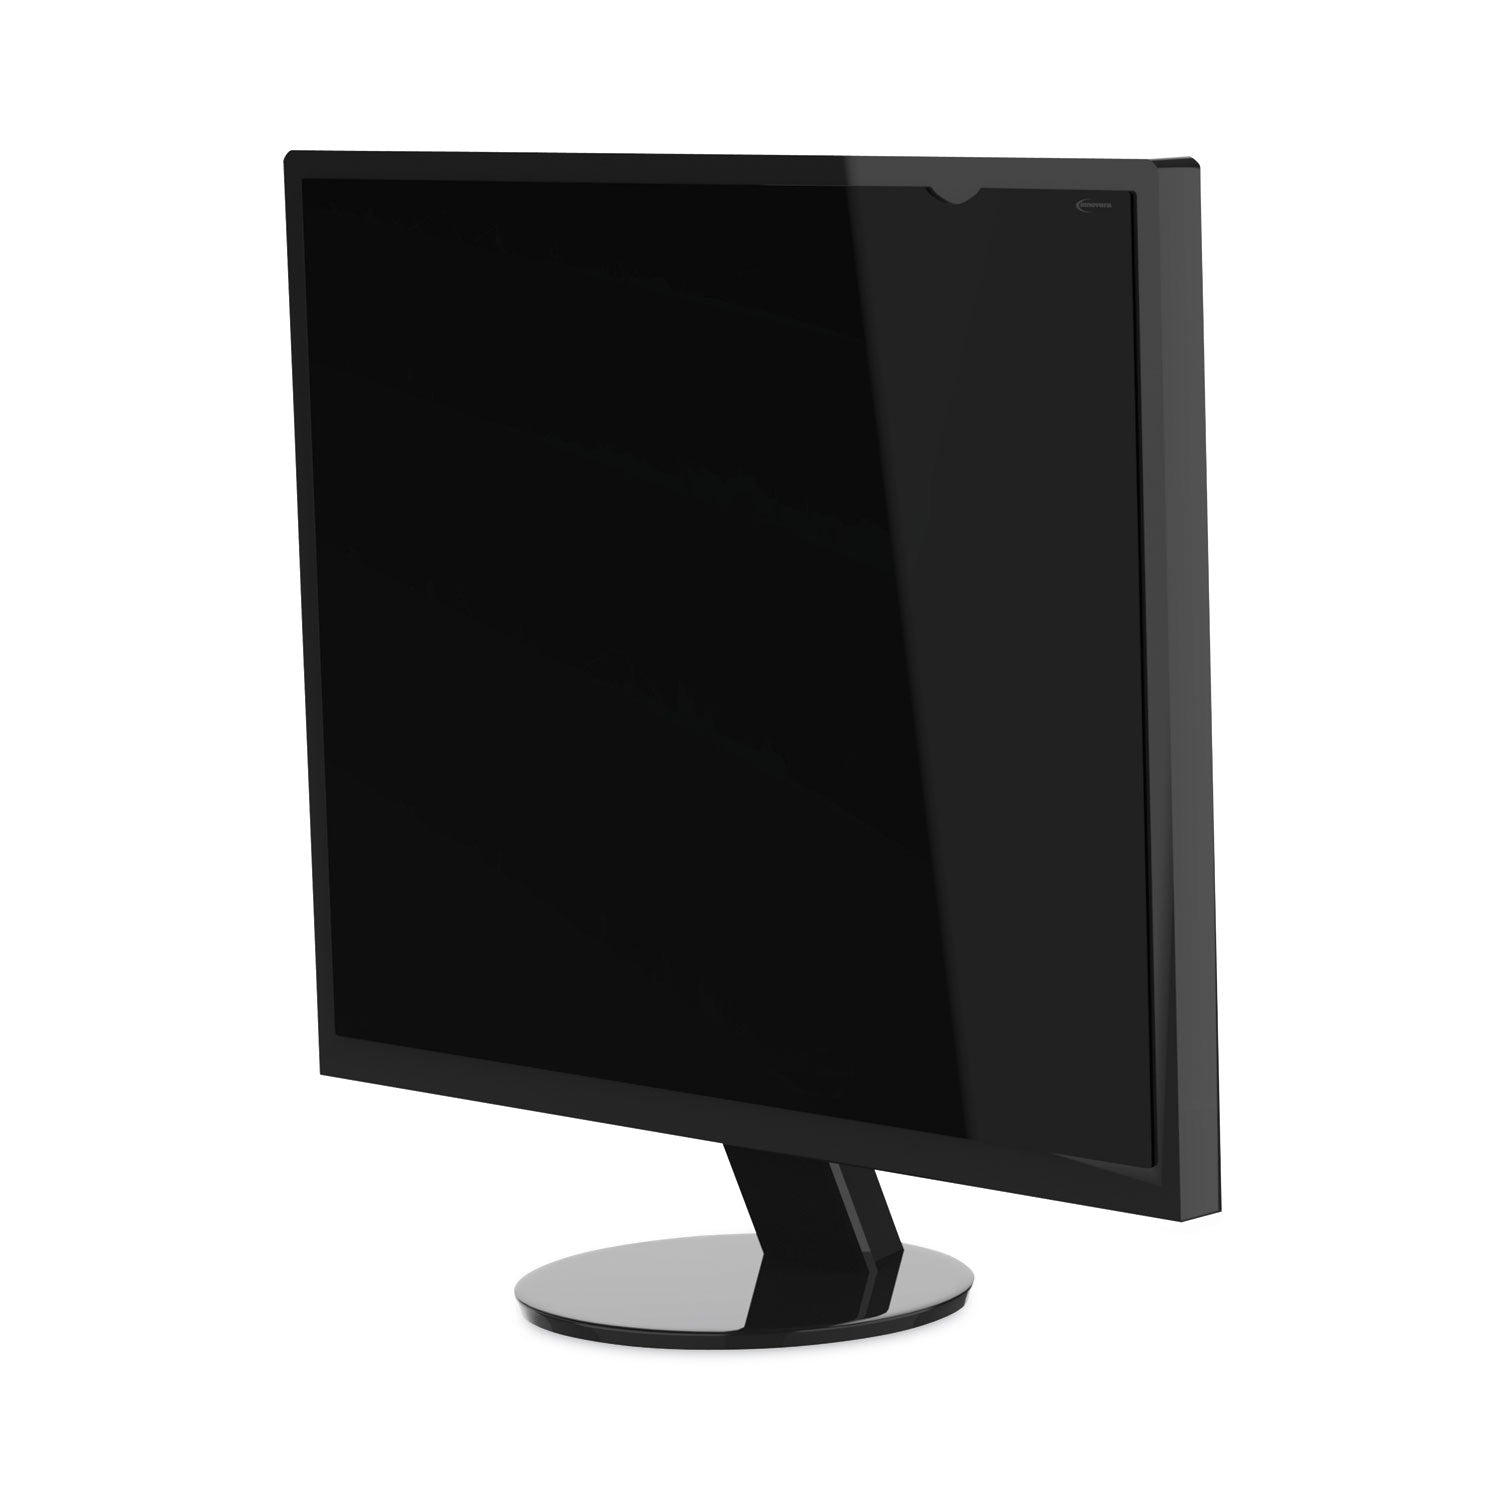 blackout-privacy-monitor-filter-for-201-flat-panel-monitor_ivrblf201 - 5